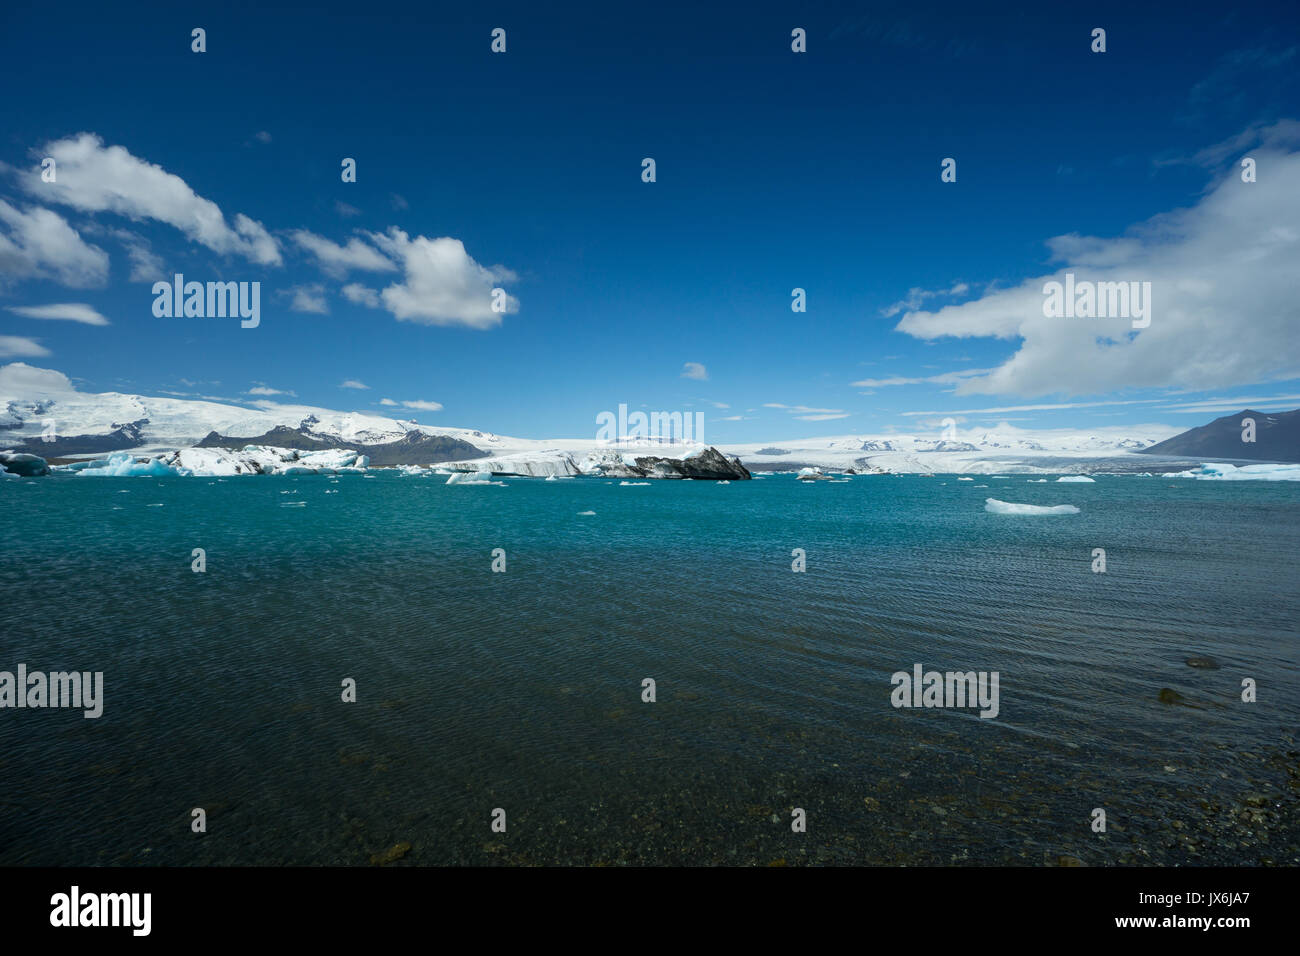 Iceland - Blue sky over agitated turquoise clear water of glacial lake Stock Photo